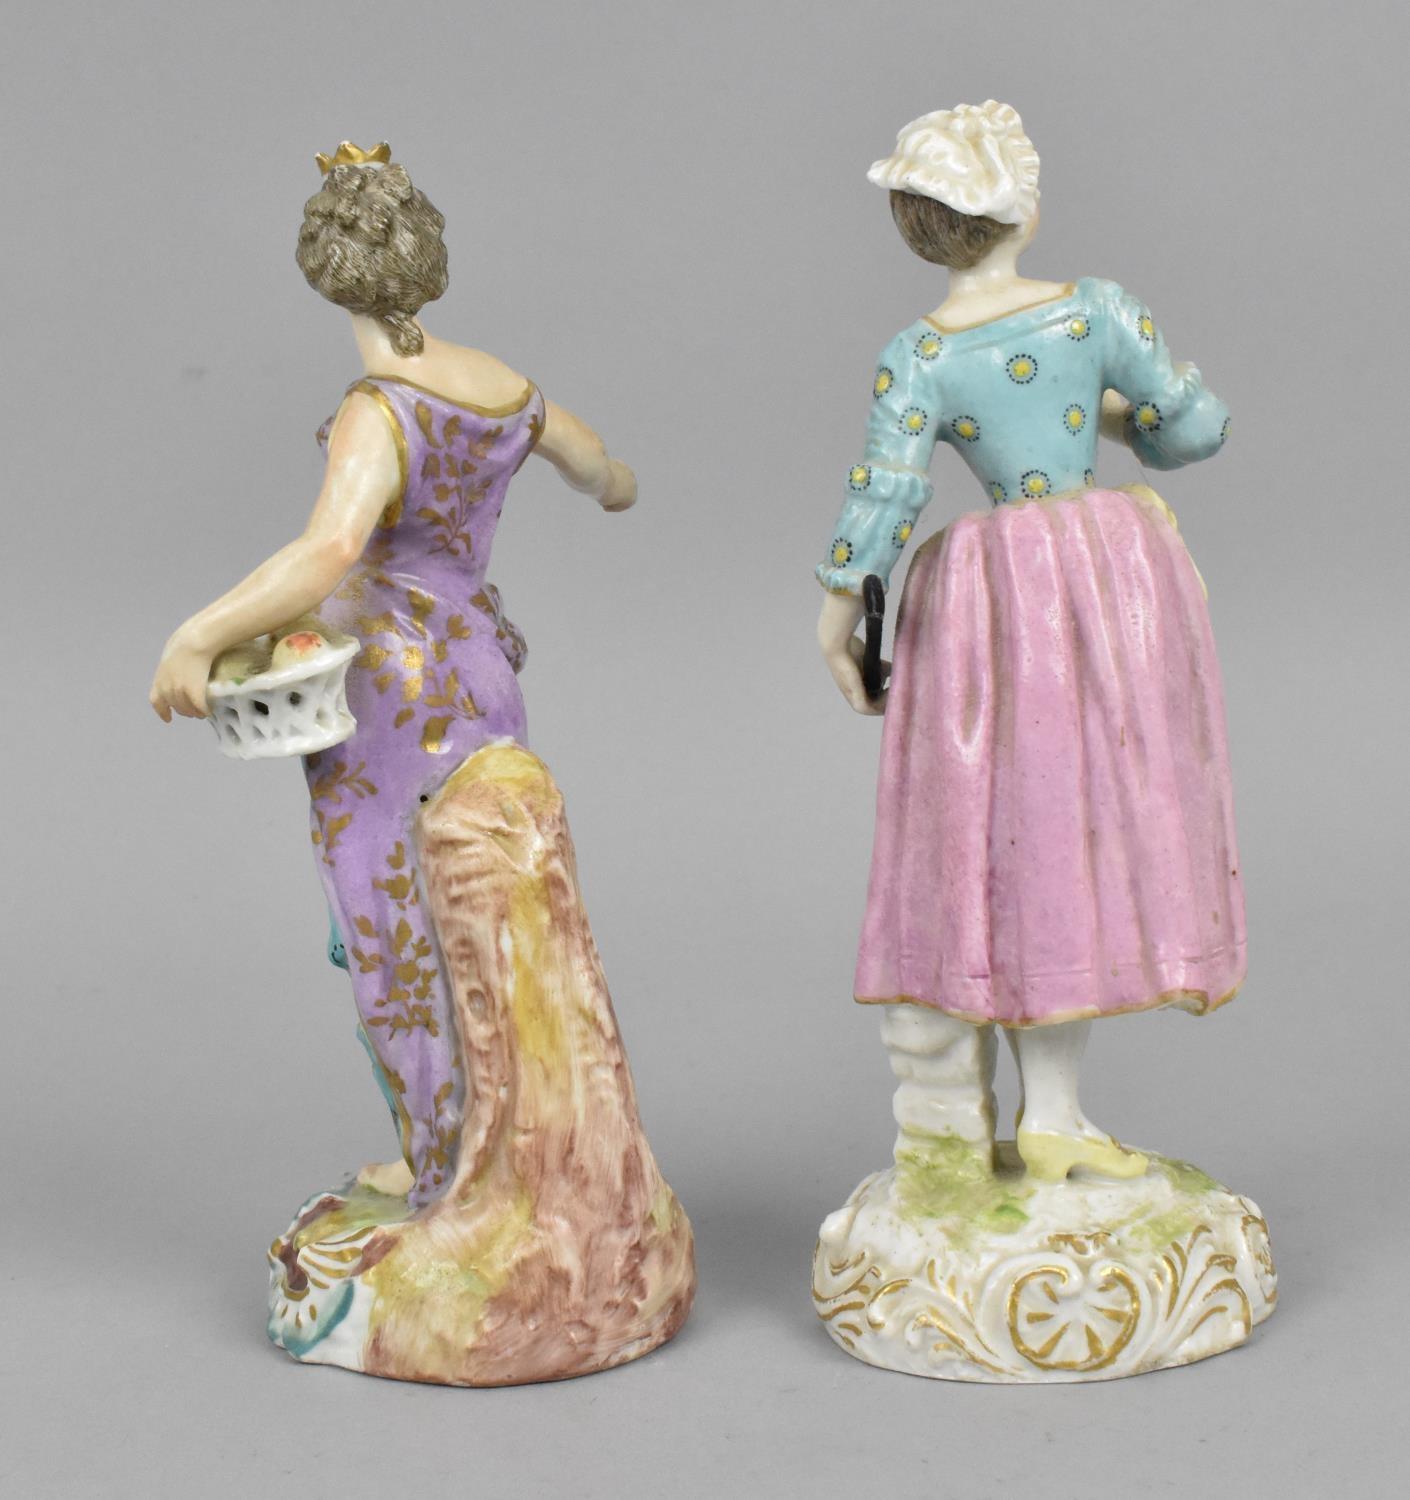 Two early 19th century Royal Crown Derby figures, one modelled as an allegorical figure with crown - Image 2 of 5